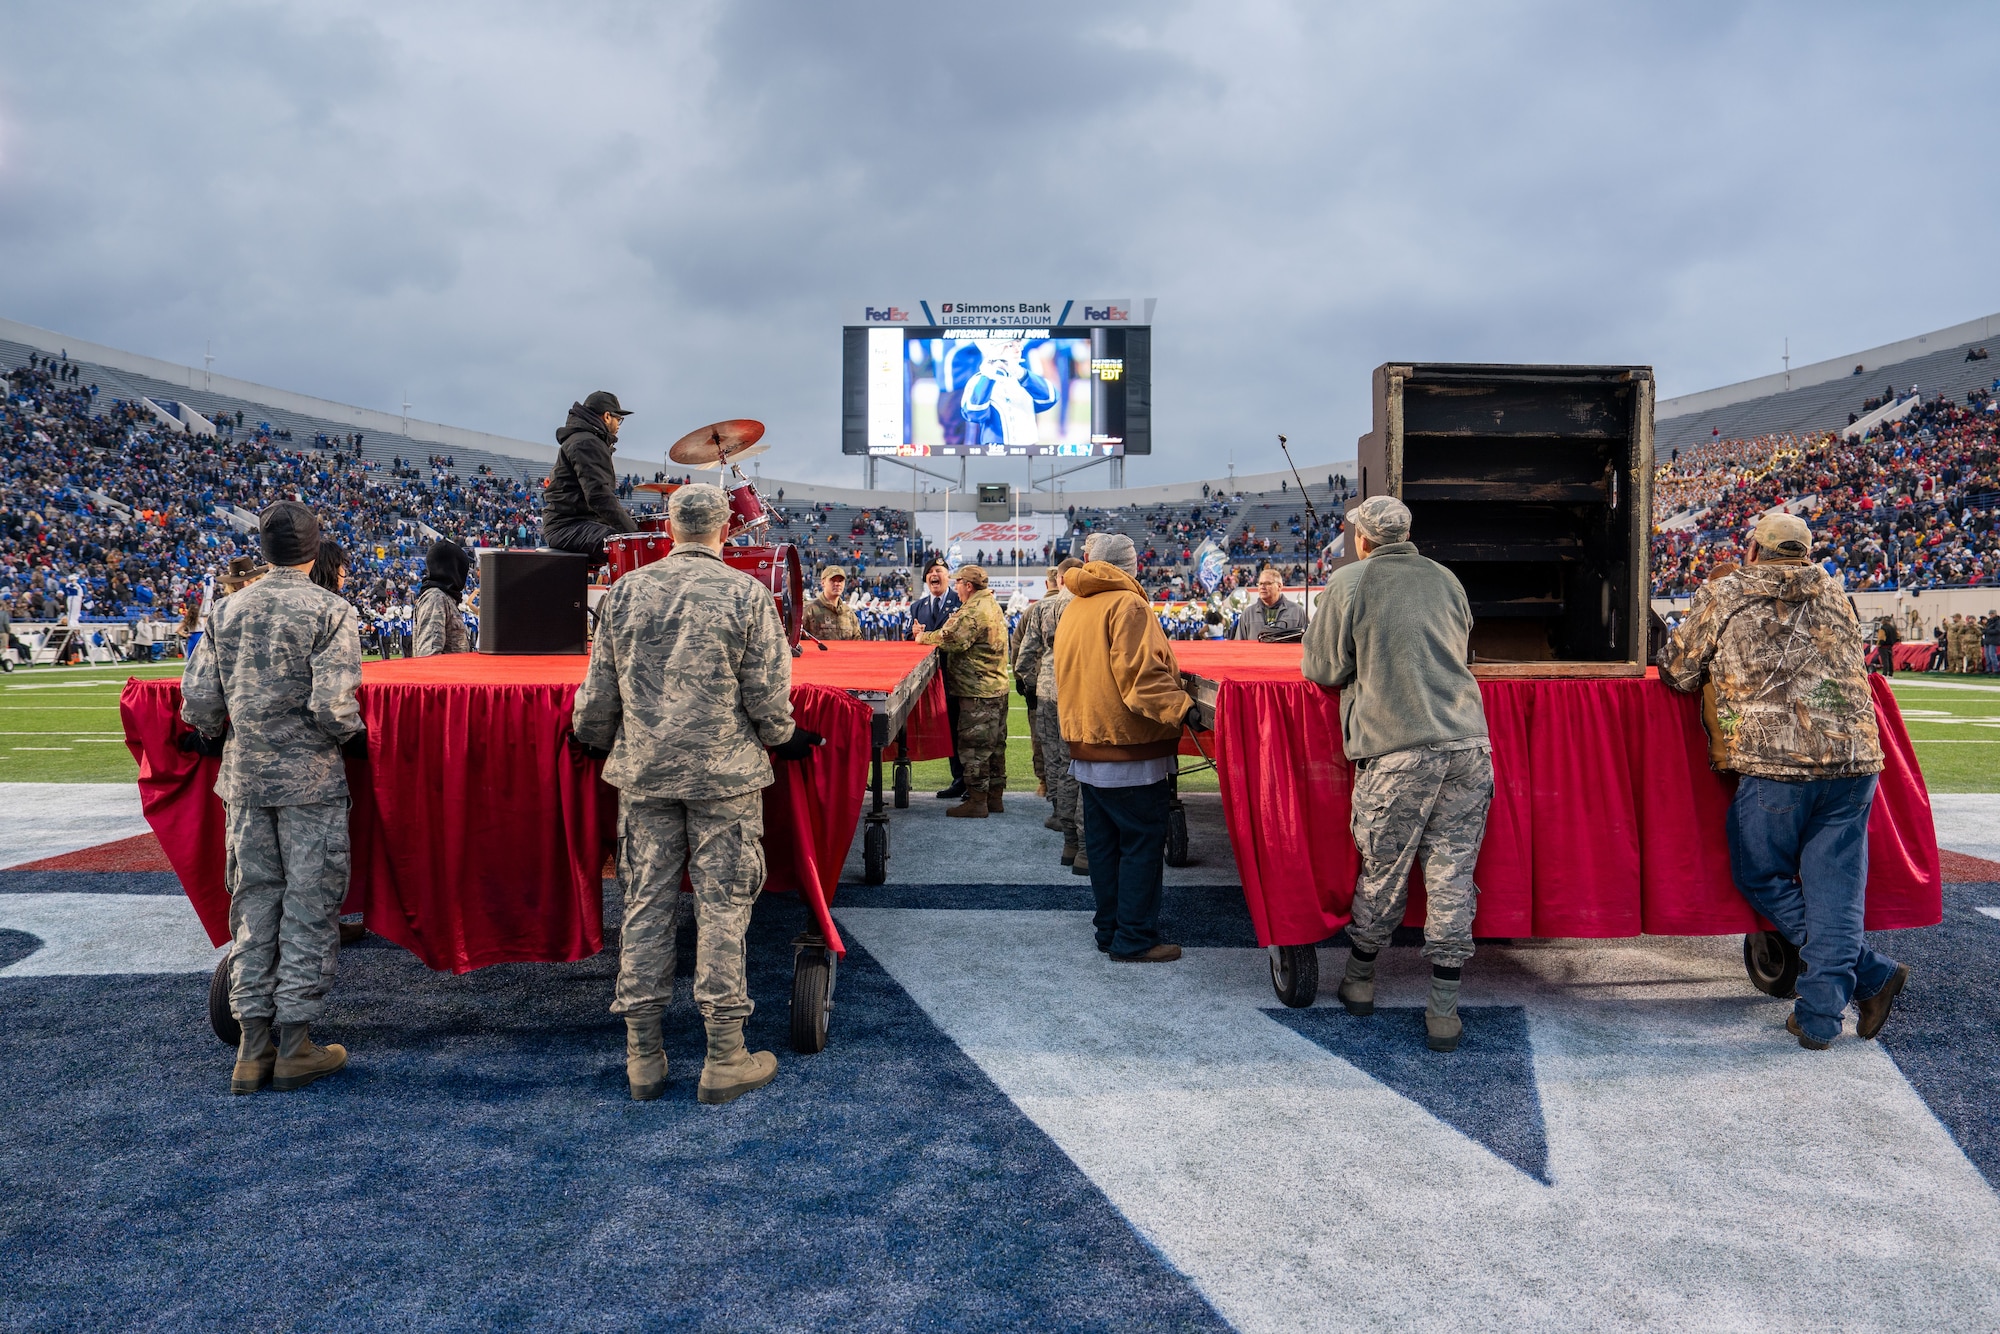 An image of a group of military personnel in uniform and civilians standing behind a red-covered stage on a football field. In the background, there is a band playing and a jumbotron showing close-ups. They were in preparation for the halftime performance, in which they had to rushe two stages onto the football field in time for a performance by the Memphis group, Bar-Kays.